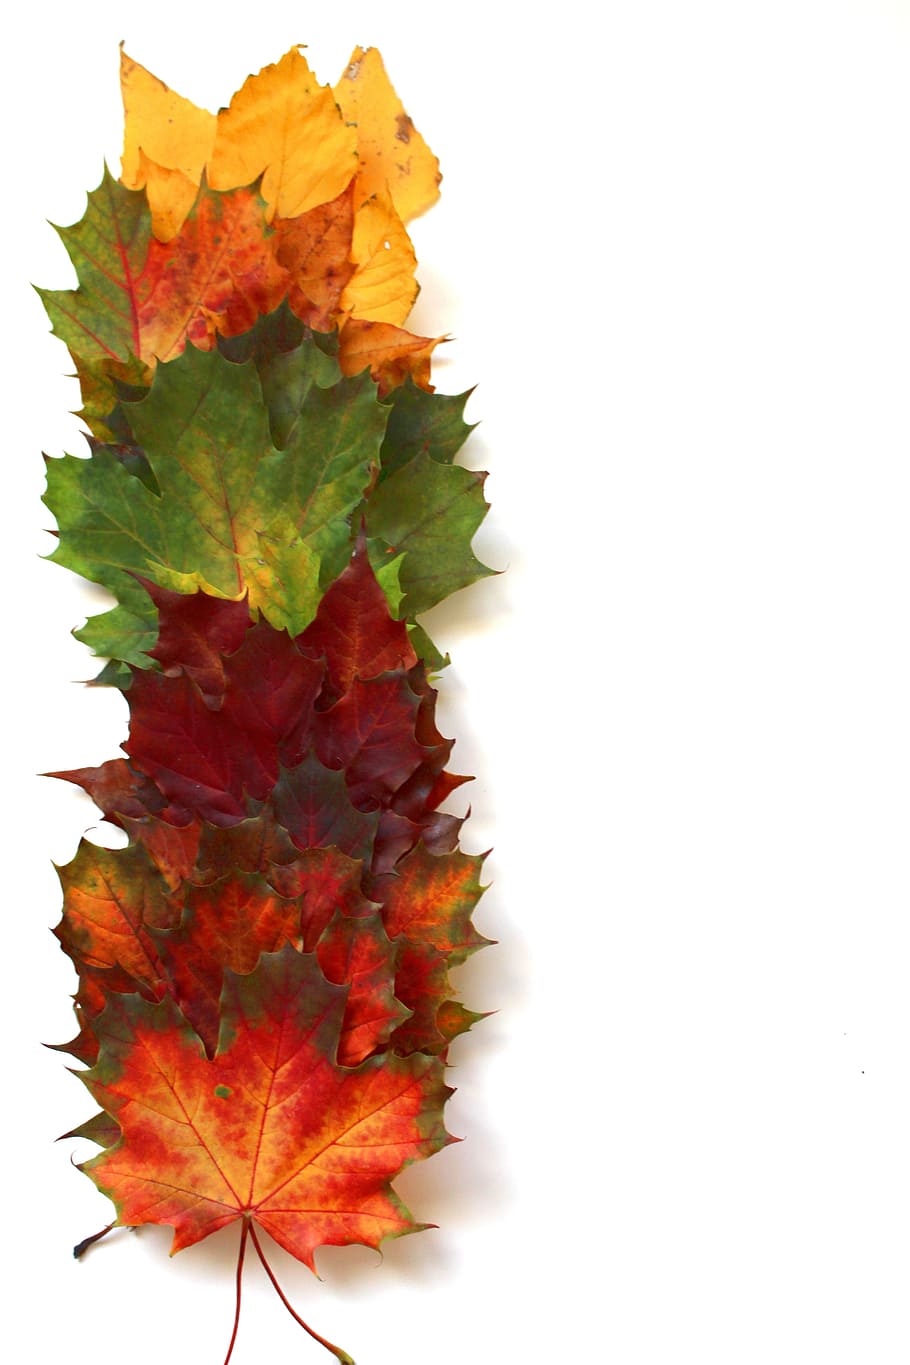 green, red, yellow, maple, leaves, placed, white, surface, autumn, fall foliage